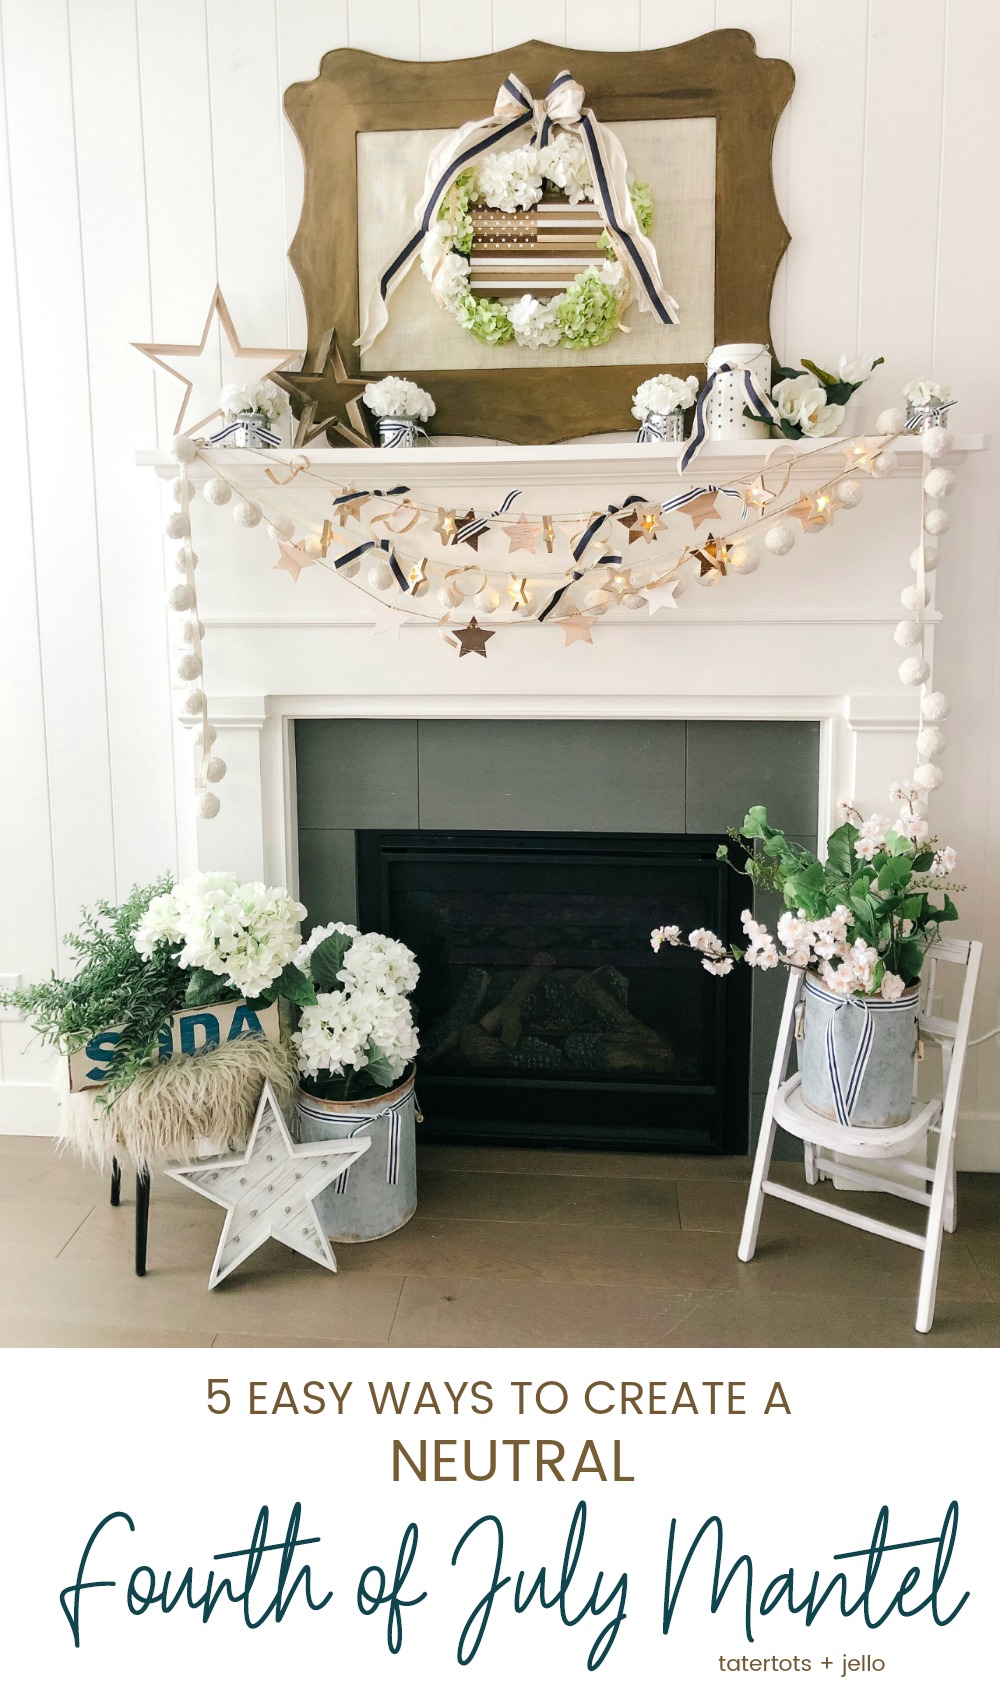 Neutral Wood Fourth of July Mantel - Farmhouse/Cottage Style. FIVE easy DIY elements to create a neutral Fourth of July mantel. Neutral elements are easy to integrate into any type of decor.